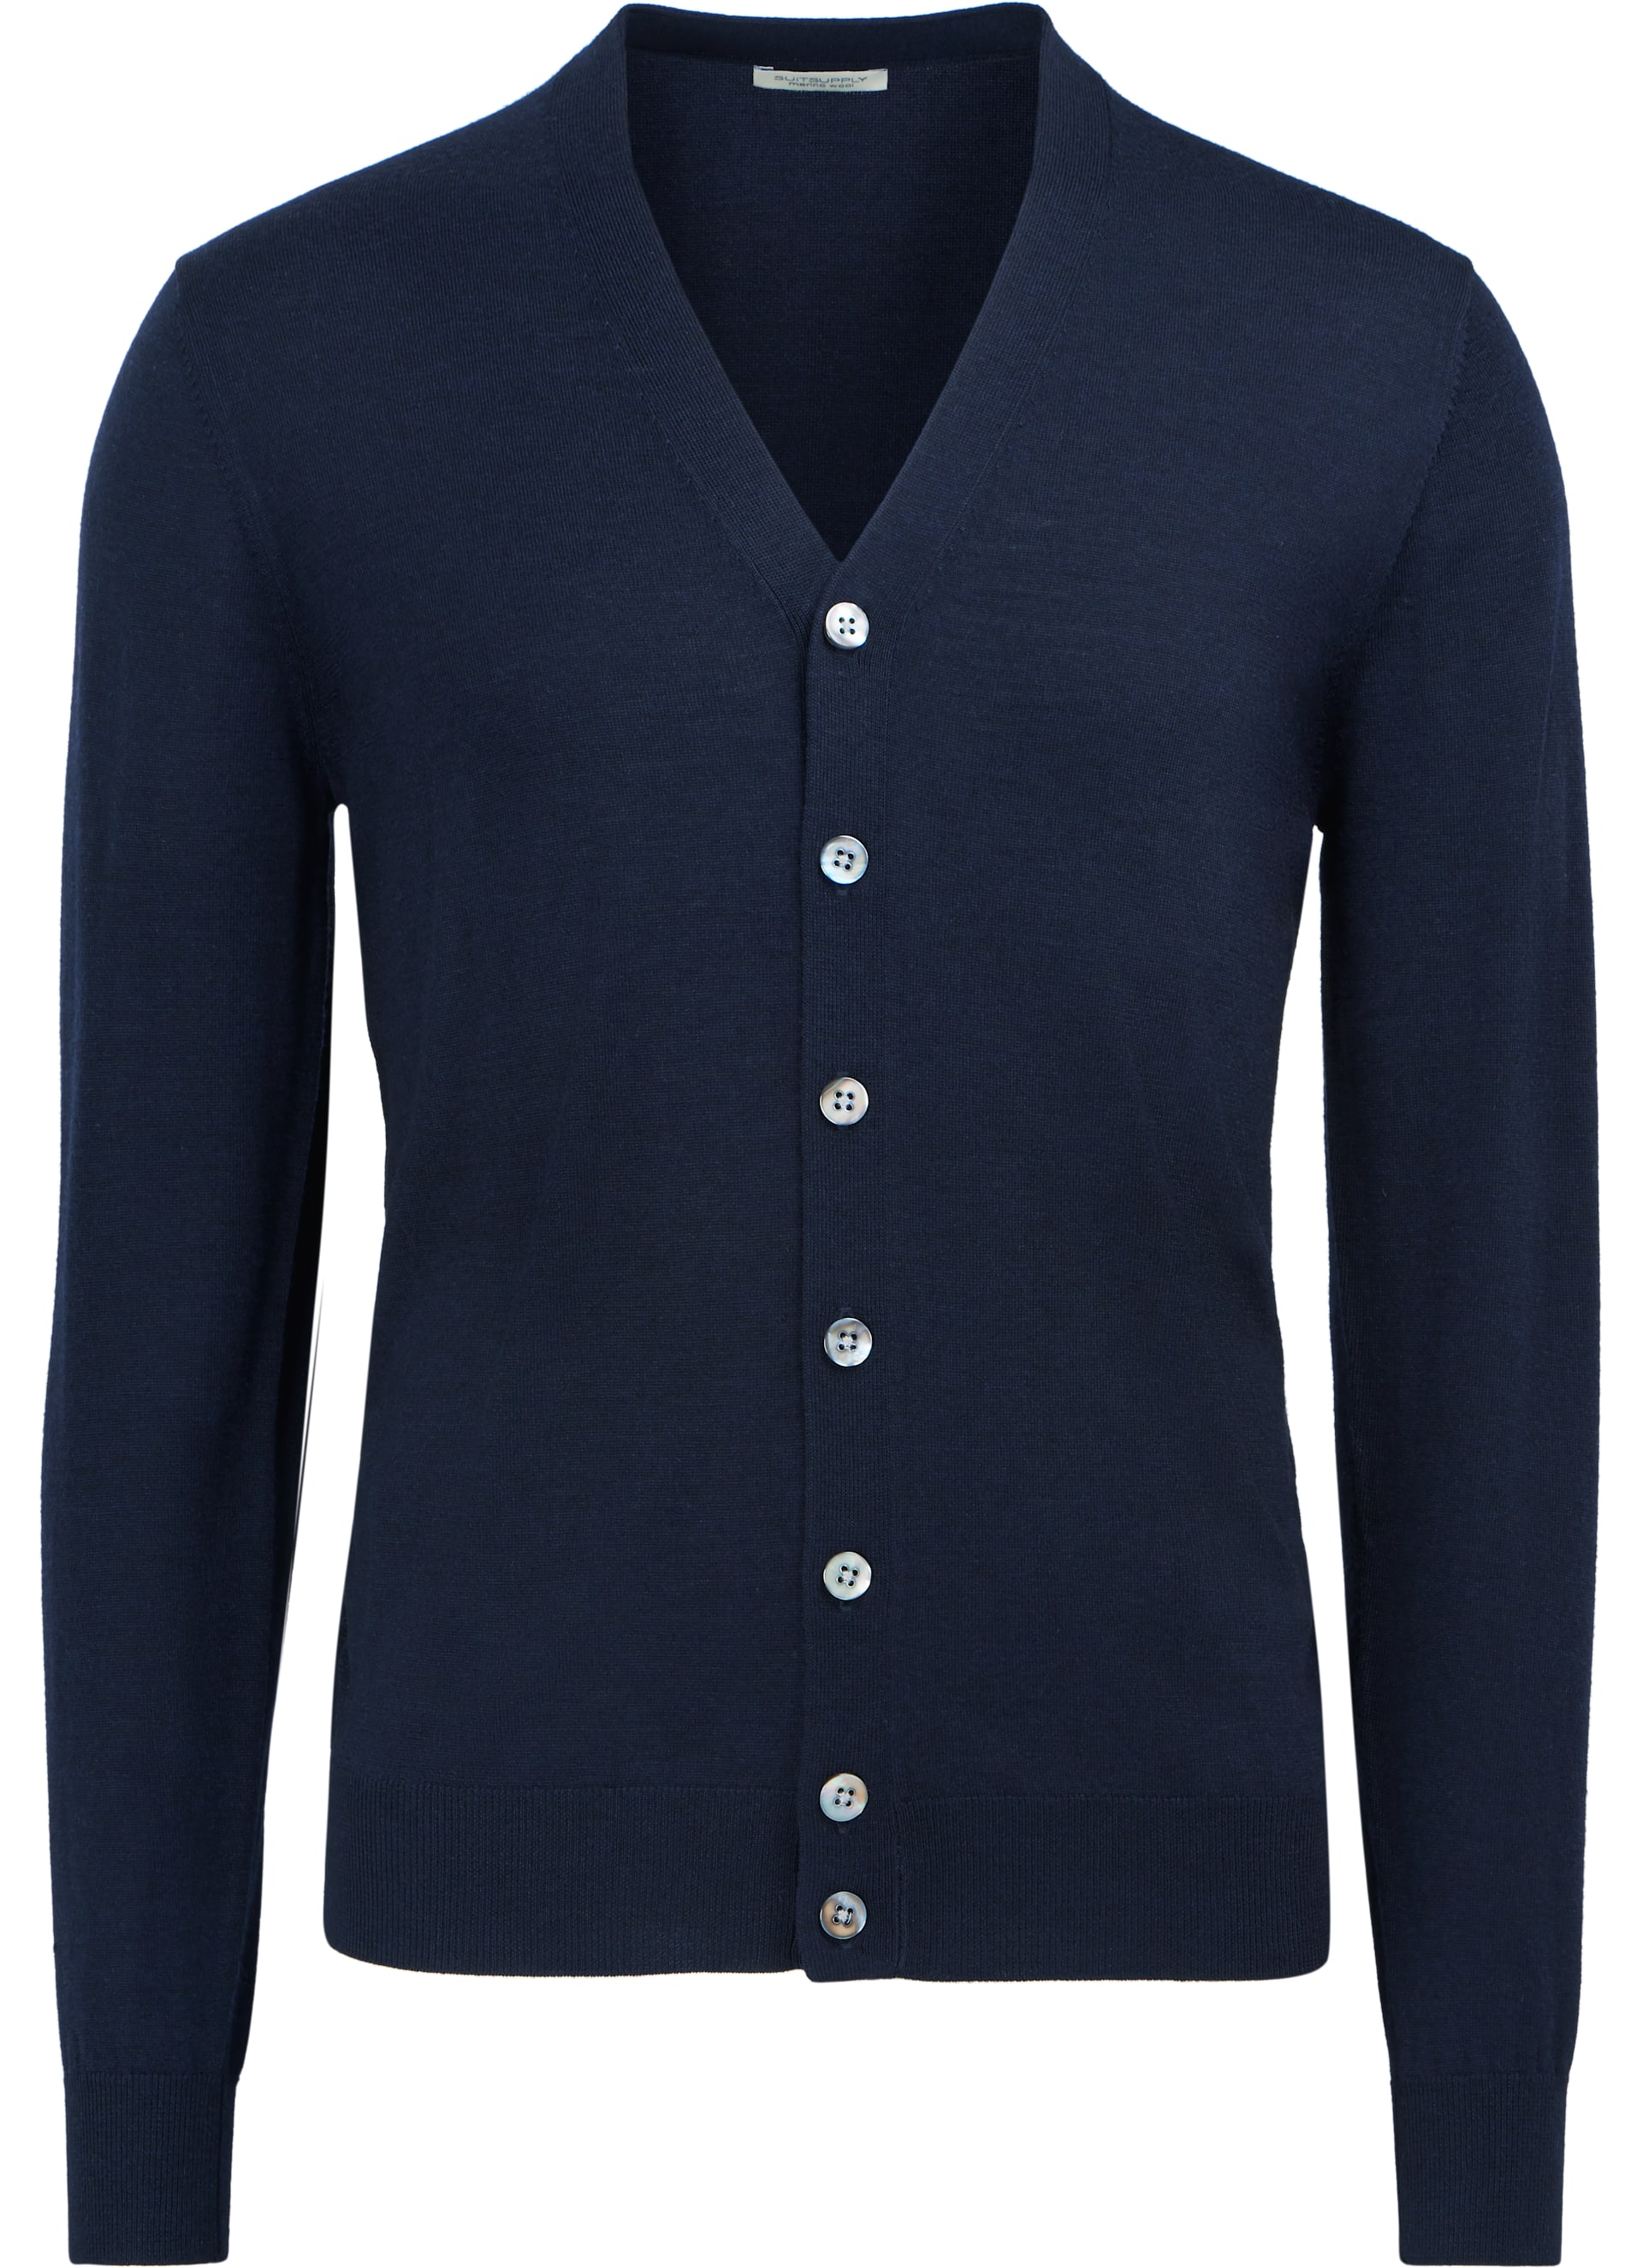 Navy Cardigan Sw753 | Suitsupply Online Store